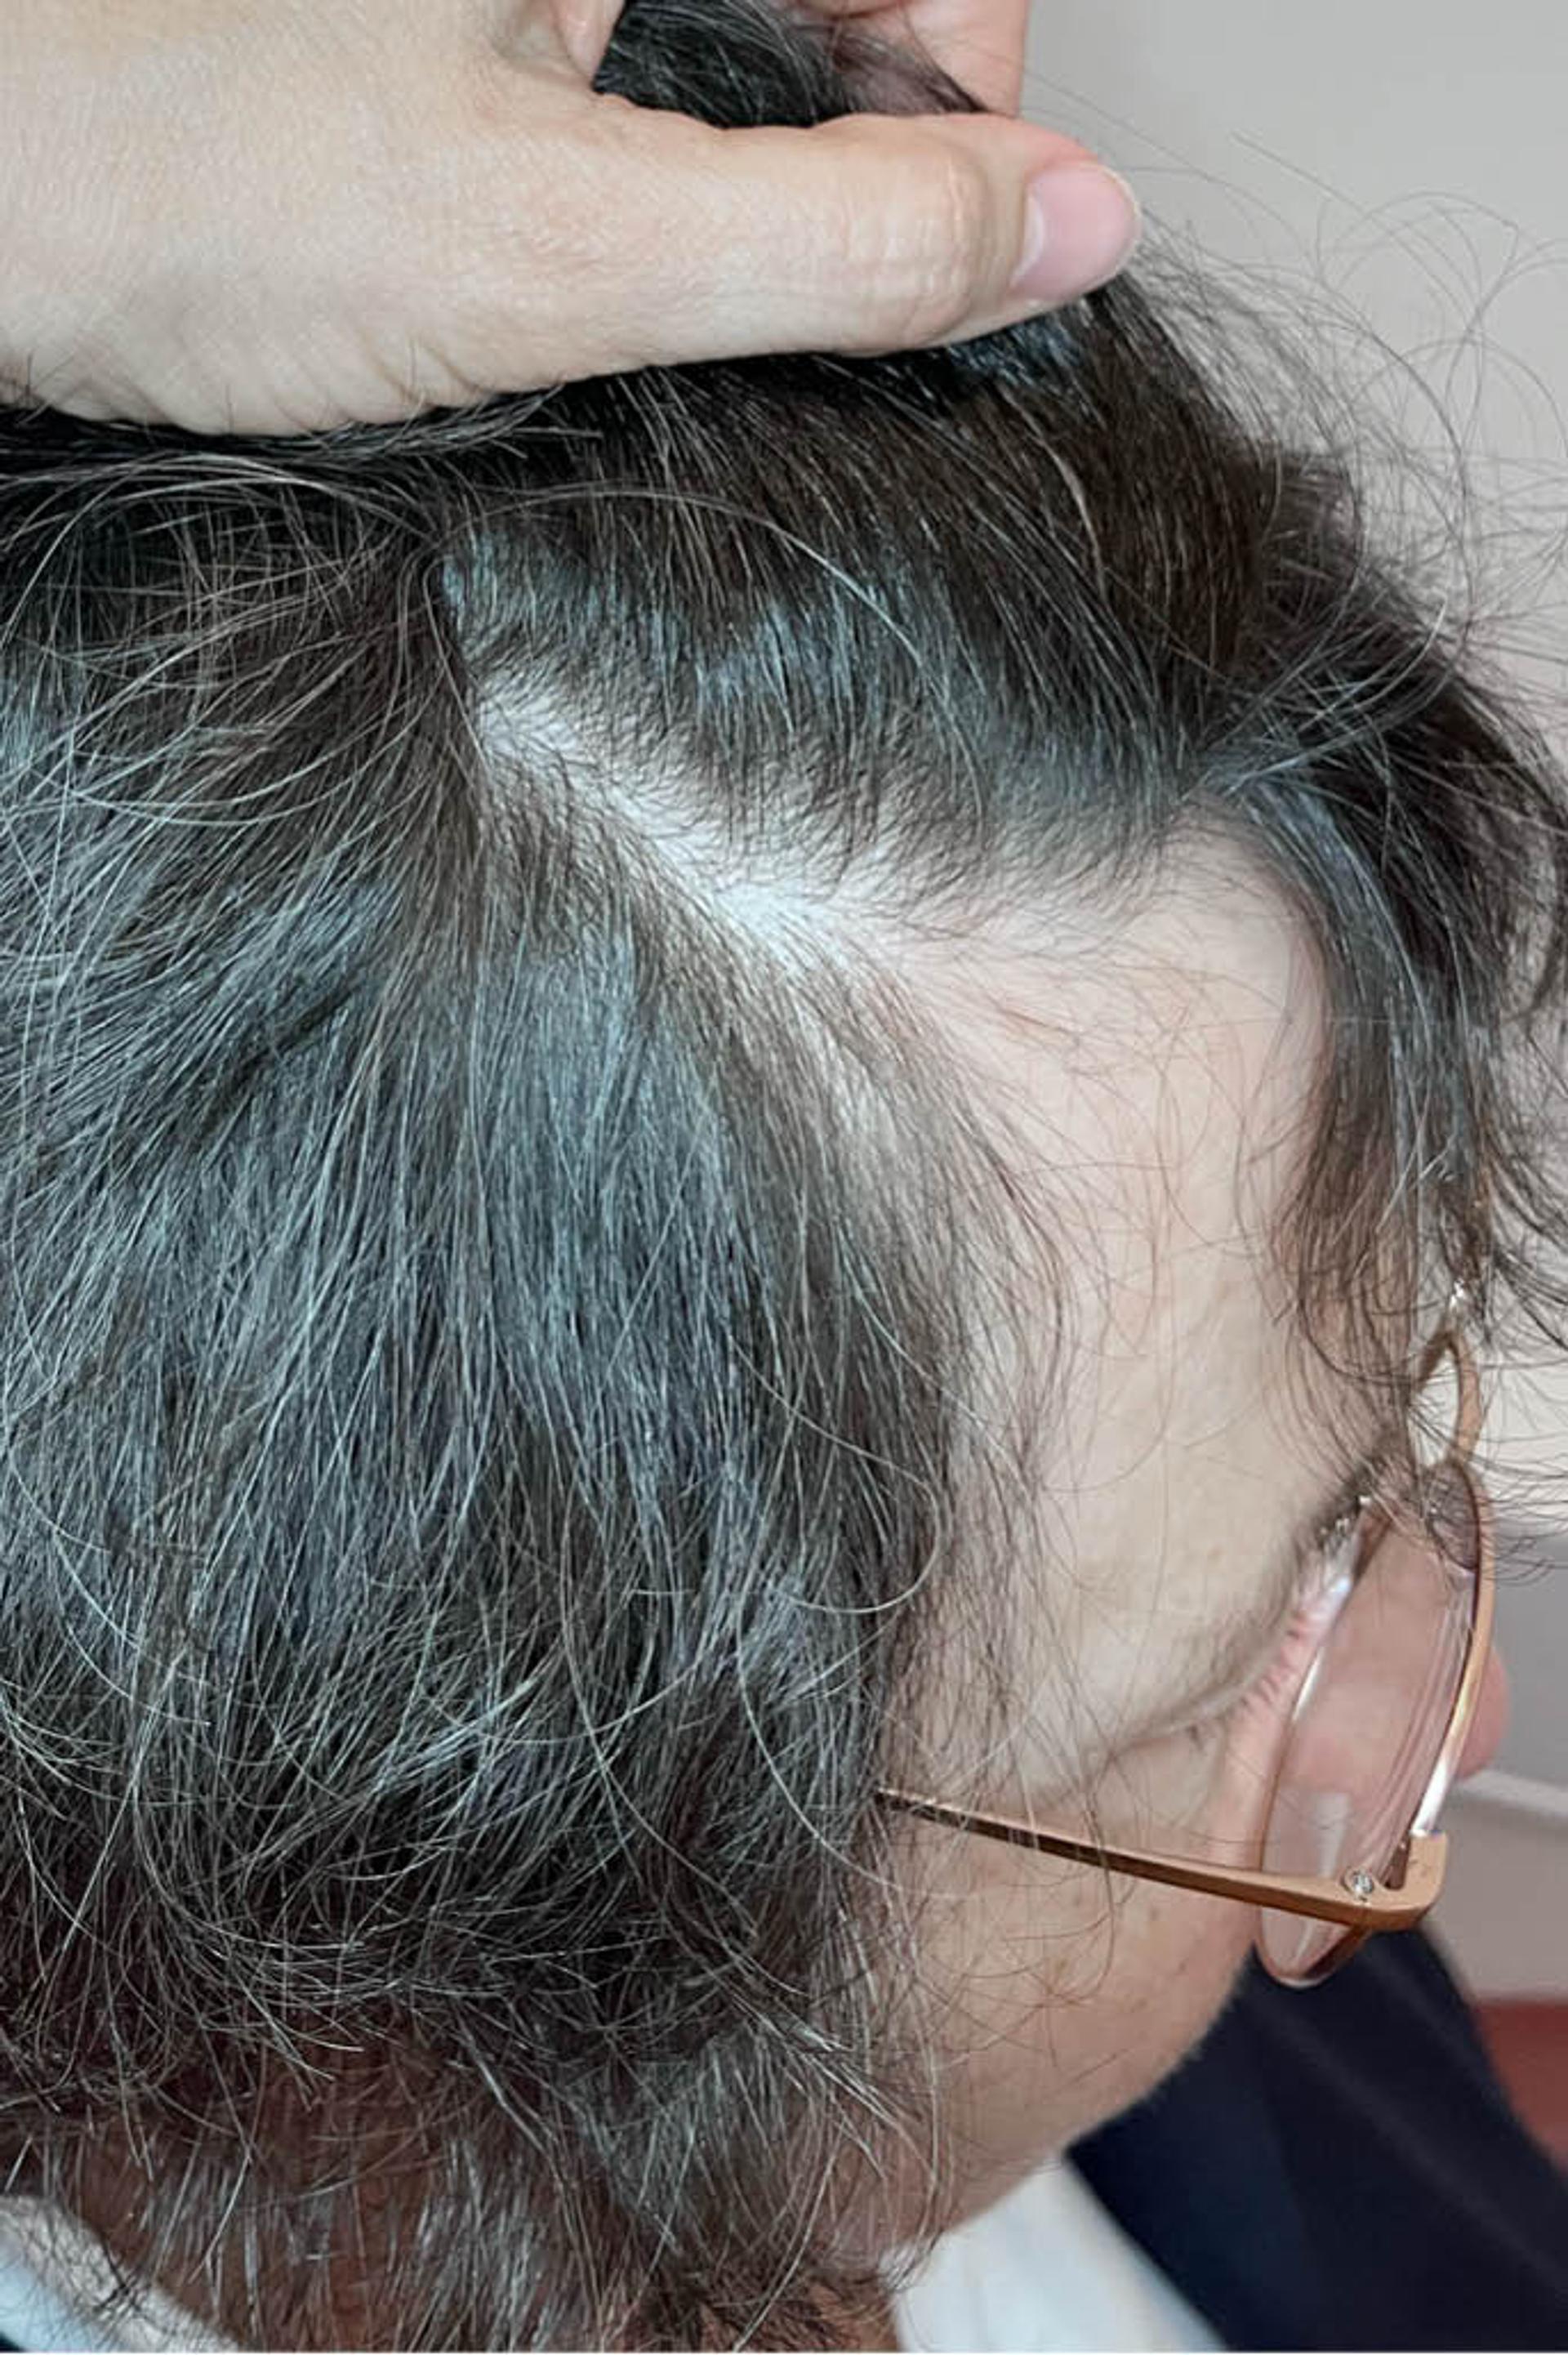 Side view of a female's temple area in her 60s with dark wavy hair 12 months after using the Harklinikken Extract